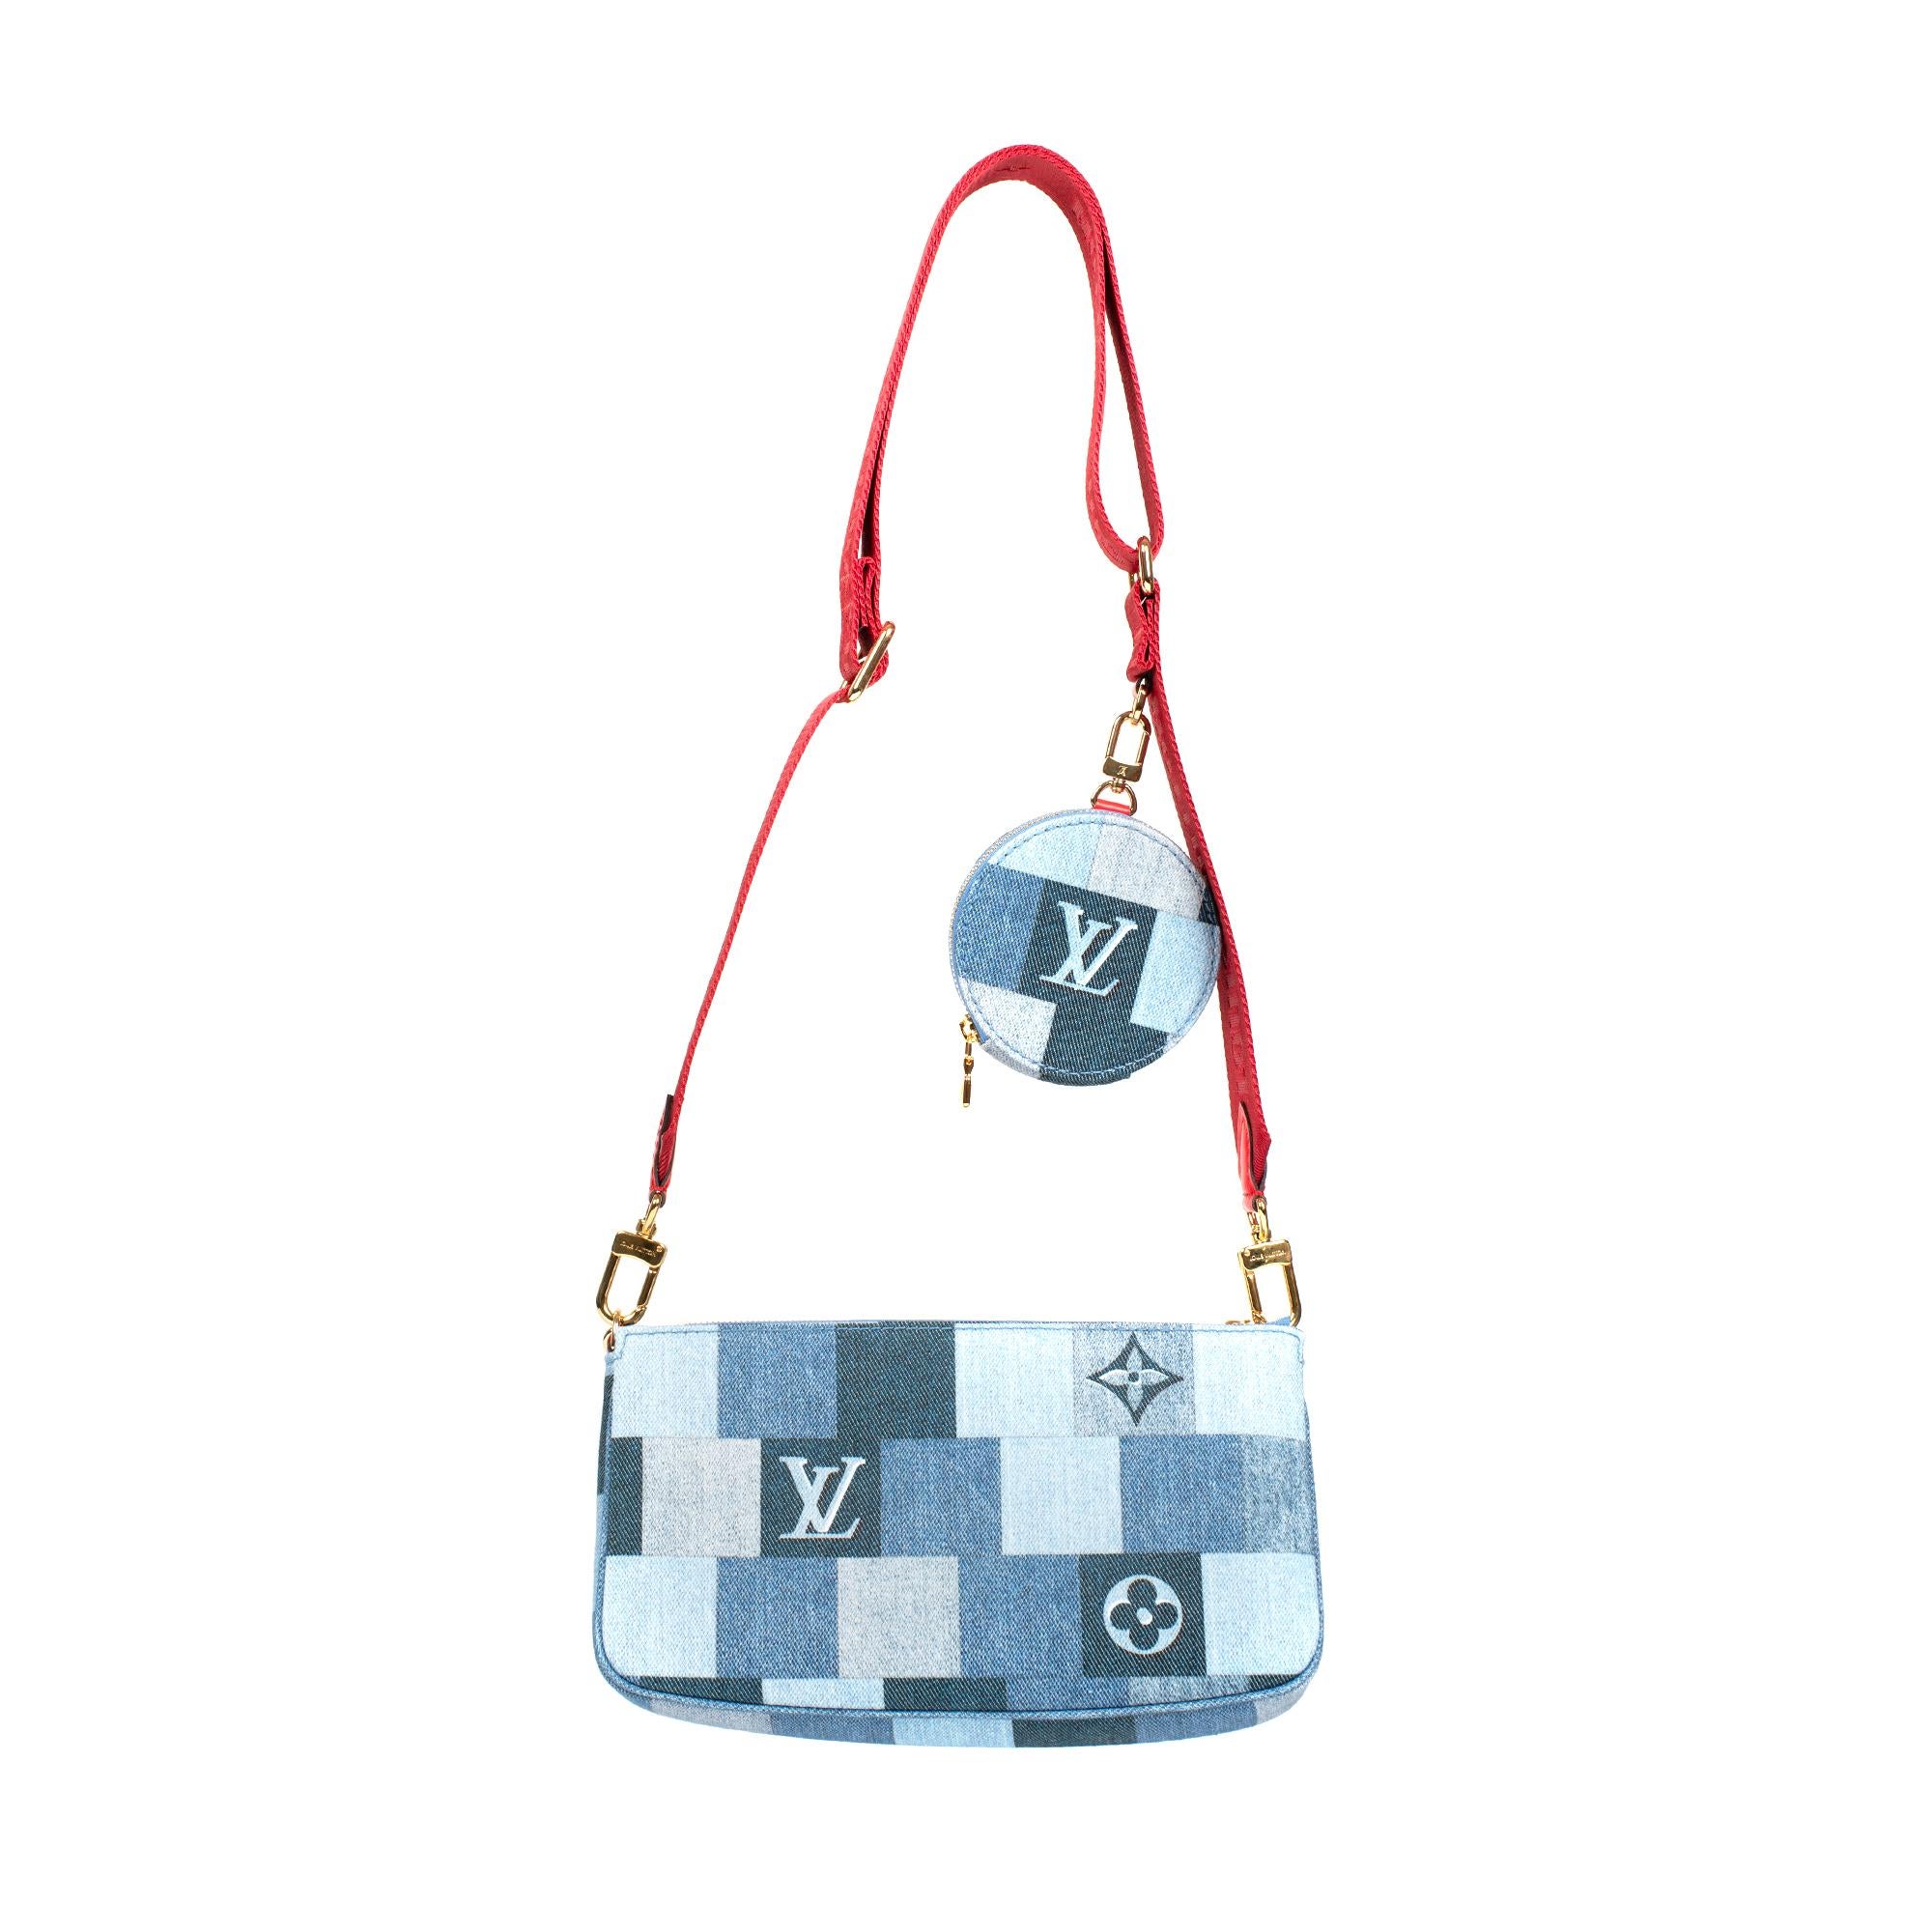 SOLD OUT- Limited Edition .

This Multi-pouch Accessories consists of a bag, a pouch and a round coin purse. The printed fabric parts of a patchwork of Checkerboard and Monogram motifs are detachable and connected to a red jacquard shoulder strap.